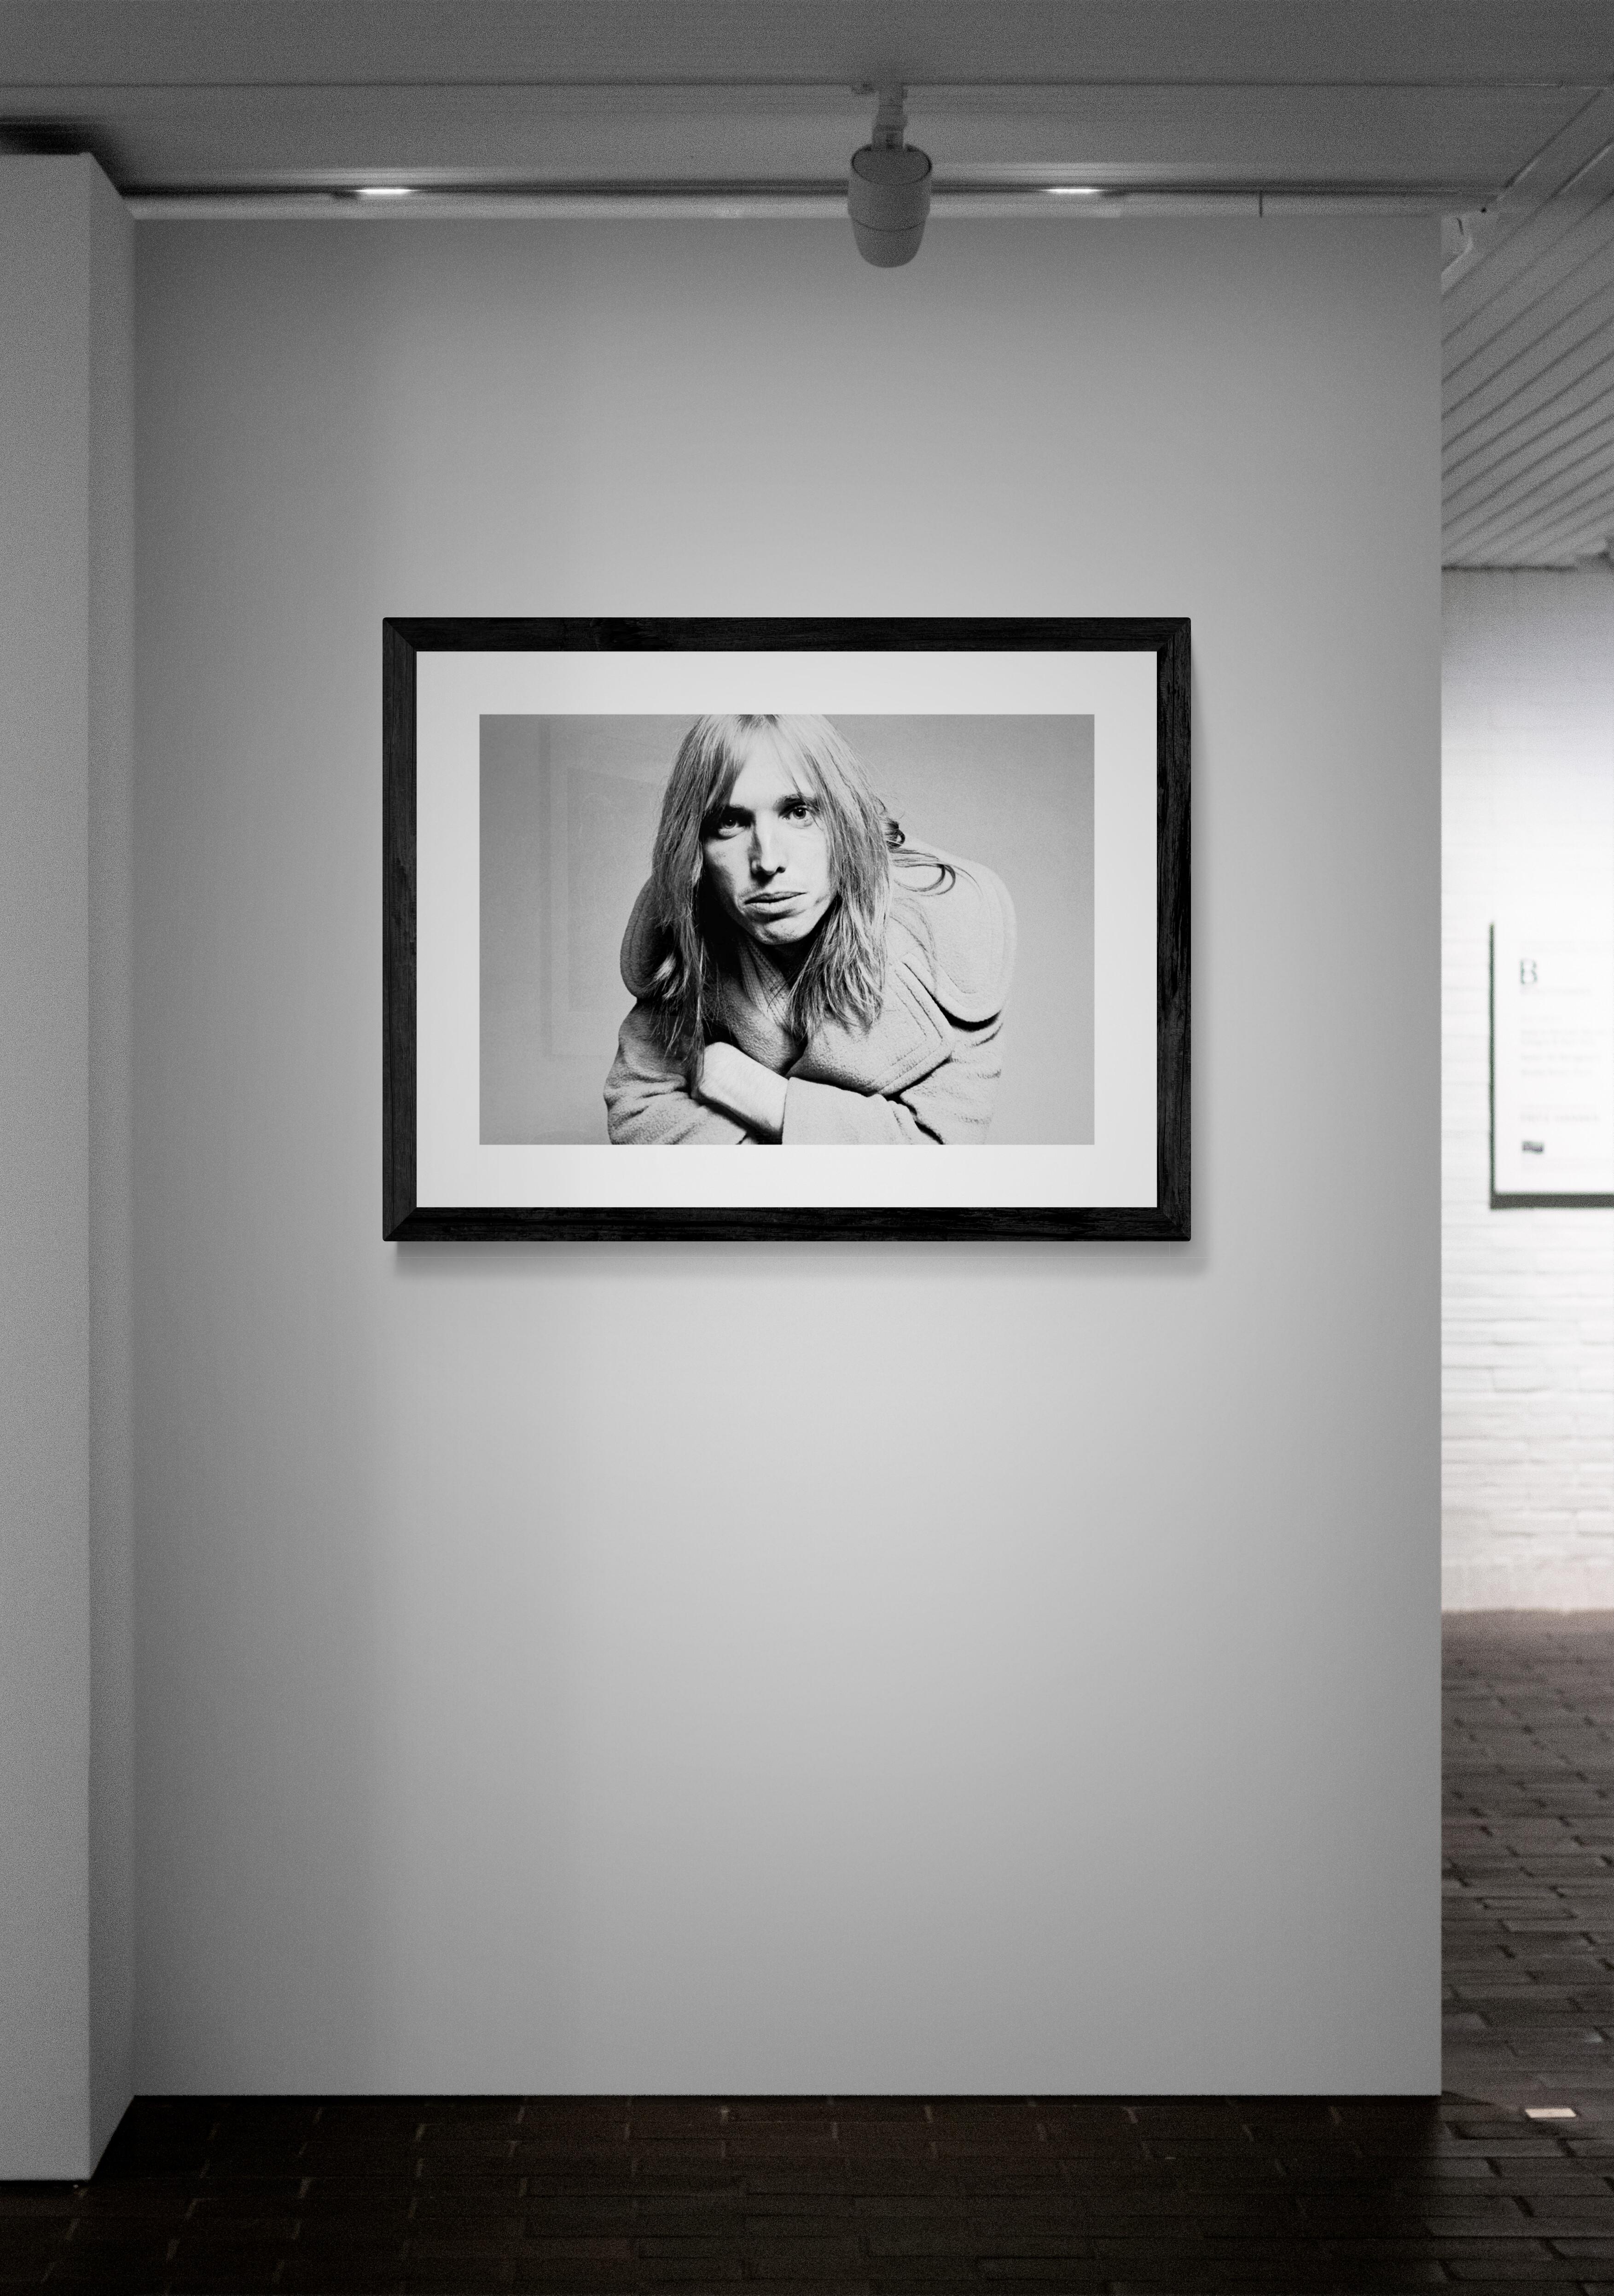 Title: Tom Petty #6 Photo
Artist: Richard E. Aaron
Estate Edition: Hand numbered with estate chop mark in the margin, signature stamp on verso, archival pigment print on Hahnemühle Photo Rag Pearl, 100% cotton paper fine art paper. Authorized